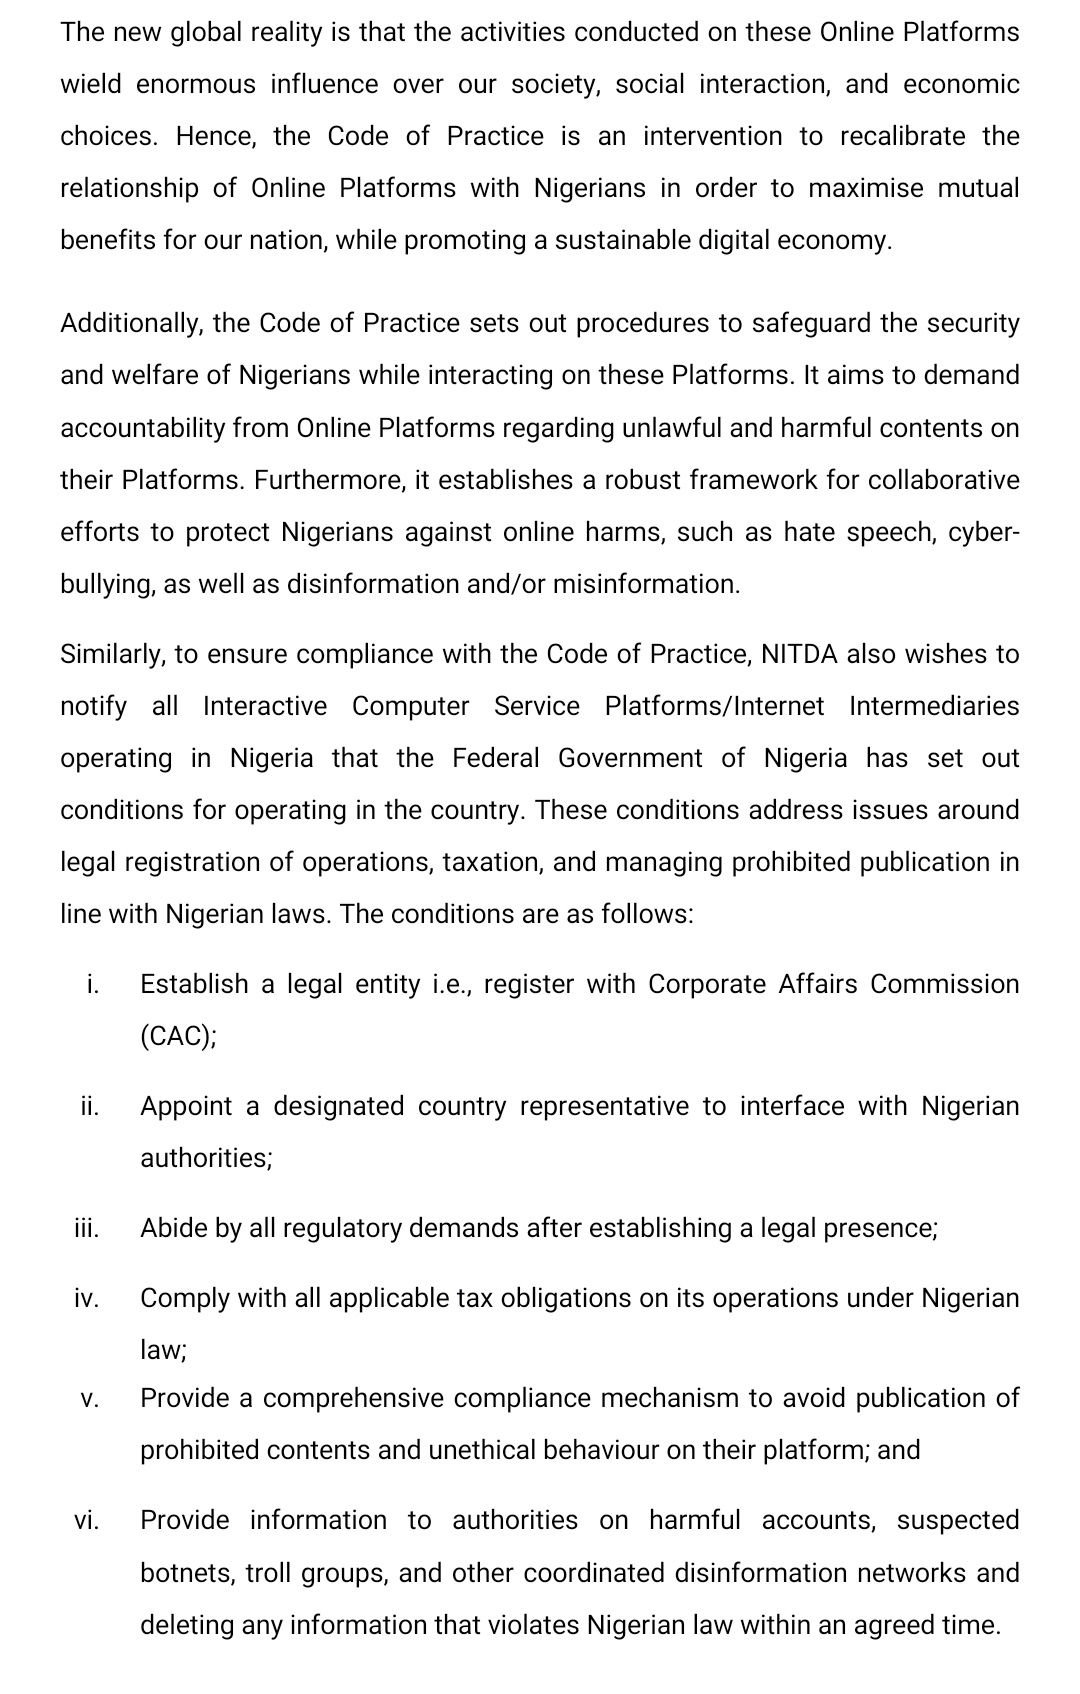 NITDA rolls out code of practice for social media operators